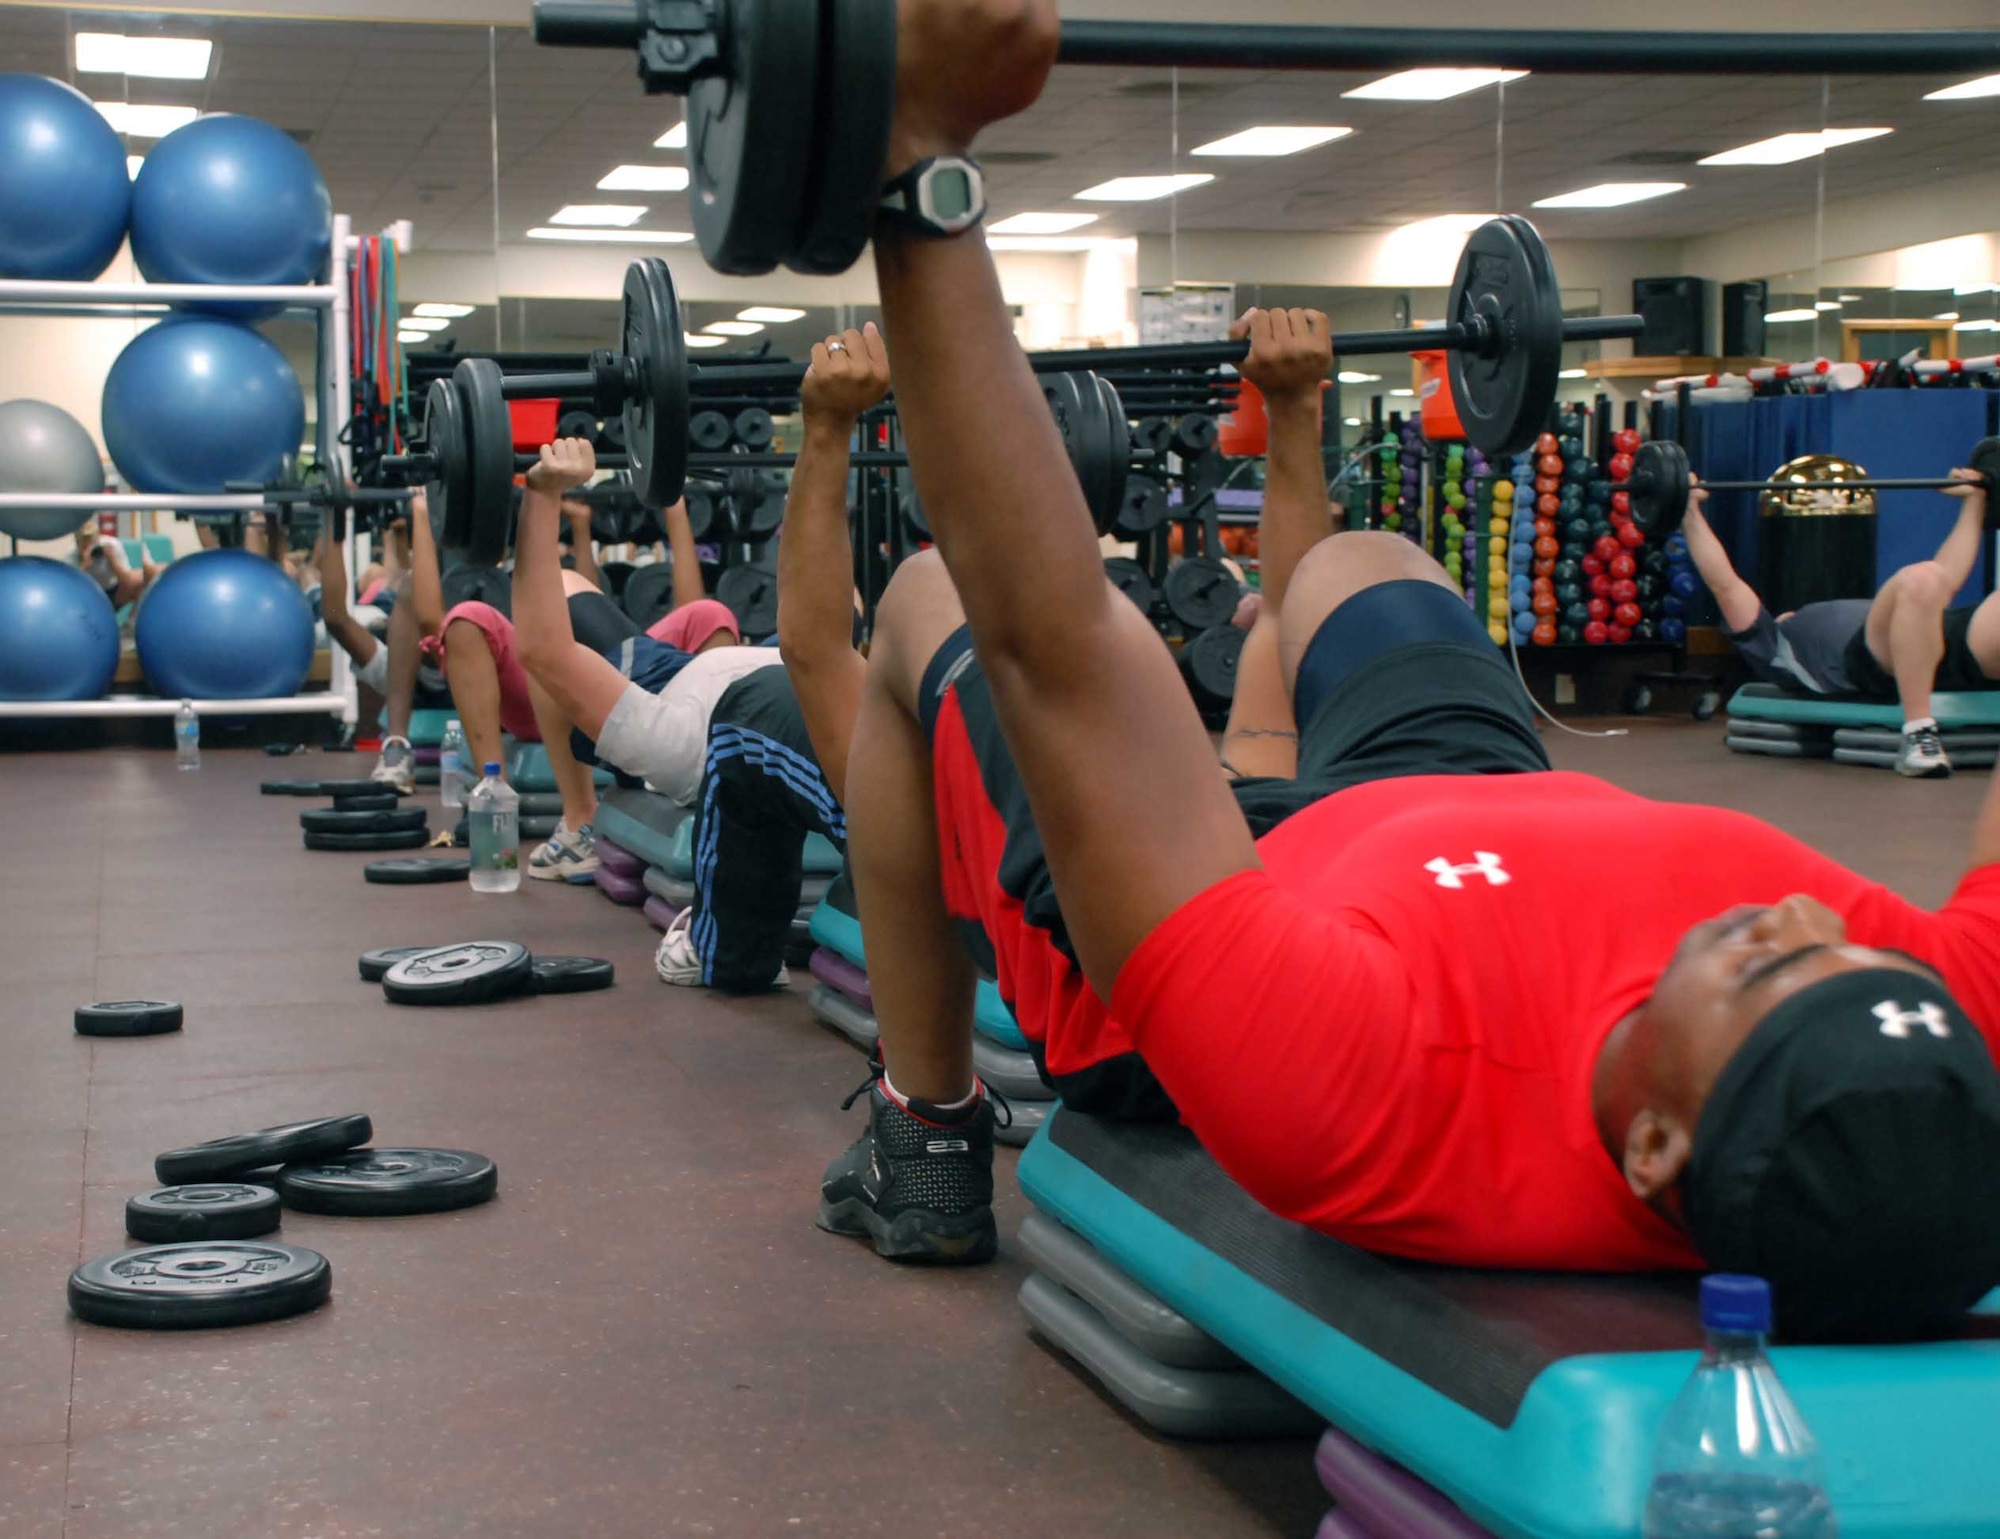 Fitness center incorporates Body Pump to get base in shape > Air Combat  Command > Display